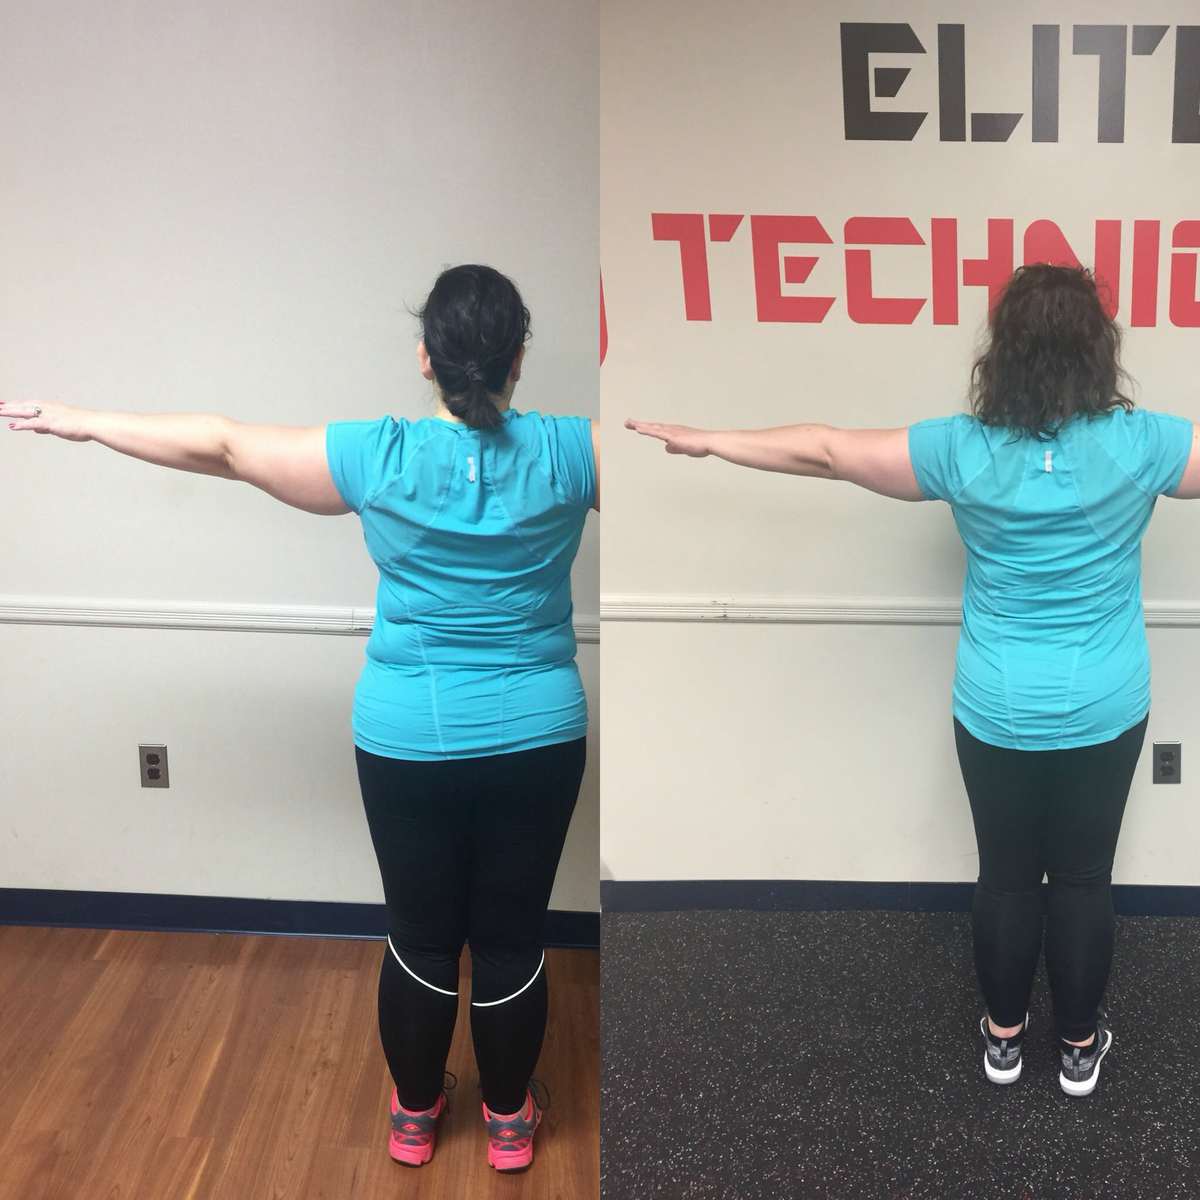 Image is of two photos. On the left, Alison Gary in December wearing a turquoise shirt and black pants, her arms raised straight out from her sides to show her shape and arm size. She is not facing the camera. On the left, the same but Alison in May. The side by side shows her body is slimmer, her stomach firmer.